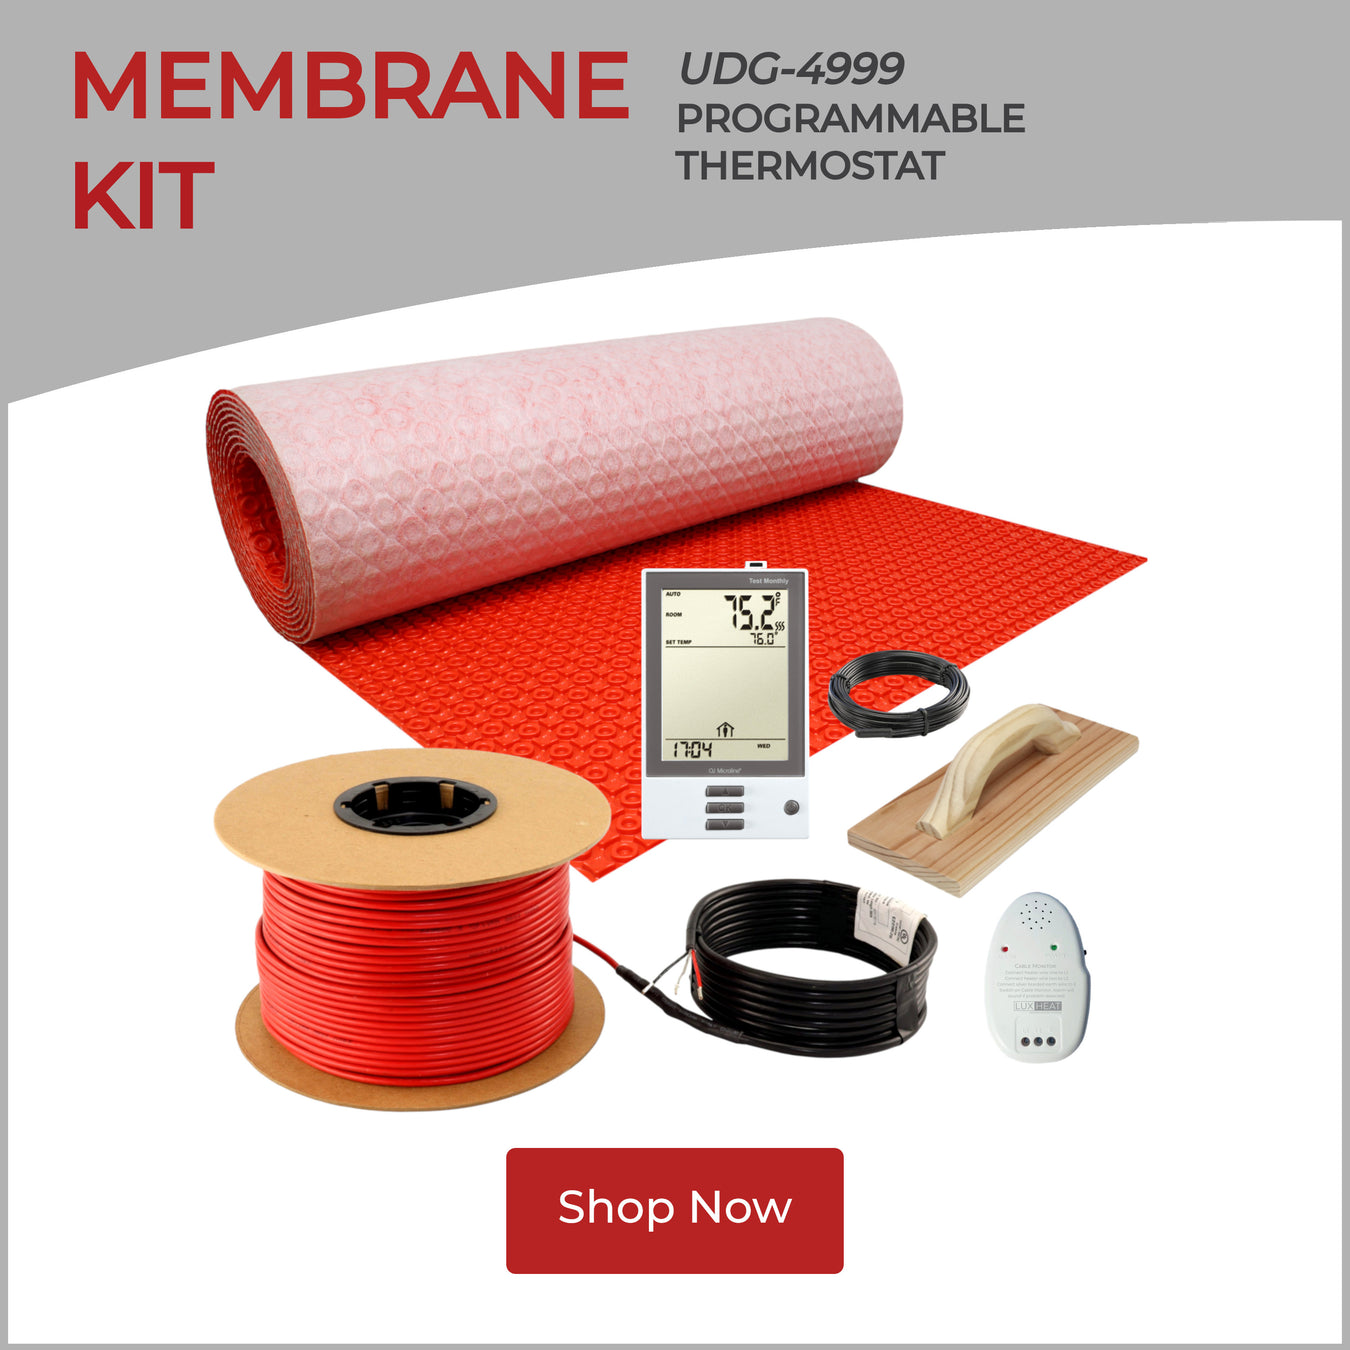 Overview_-_Membrane_Kit_with_UDG